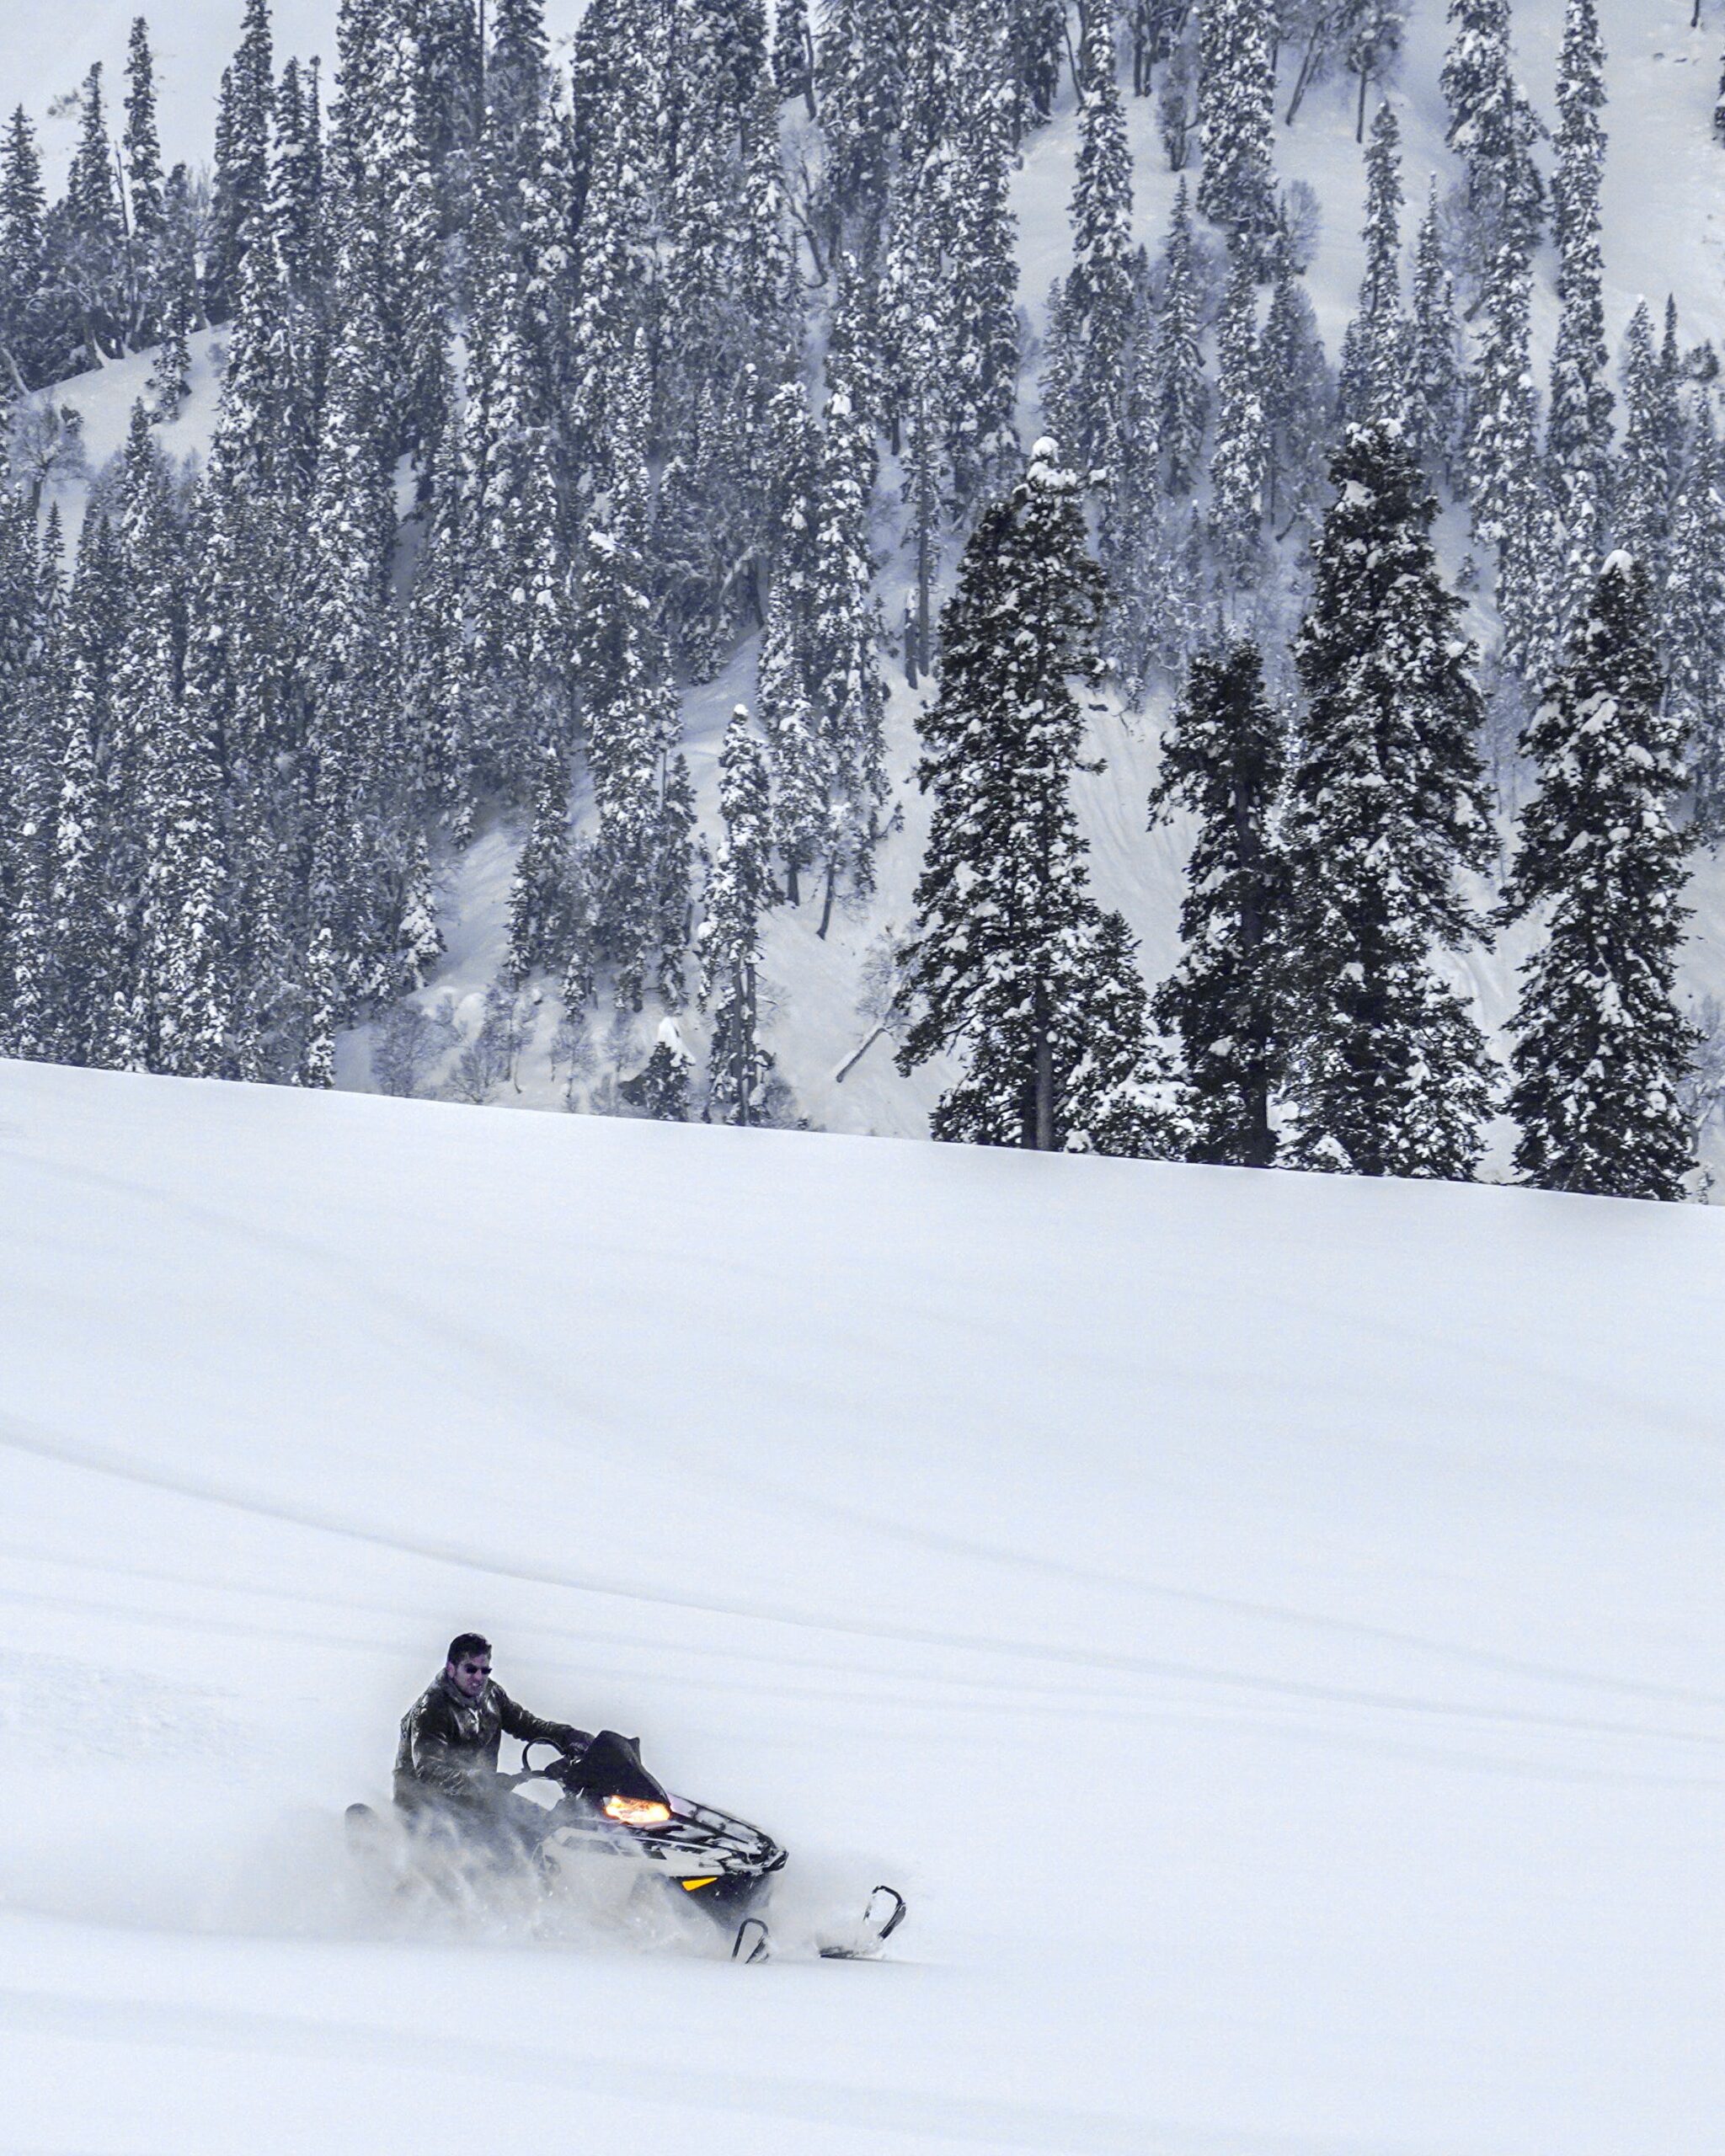 A Man Riding Snowmobile on Snow Covered Mountain Slope